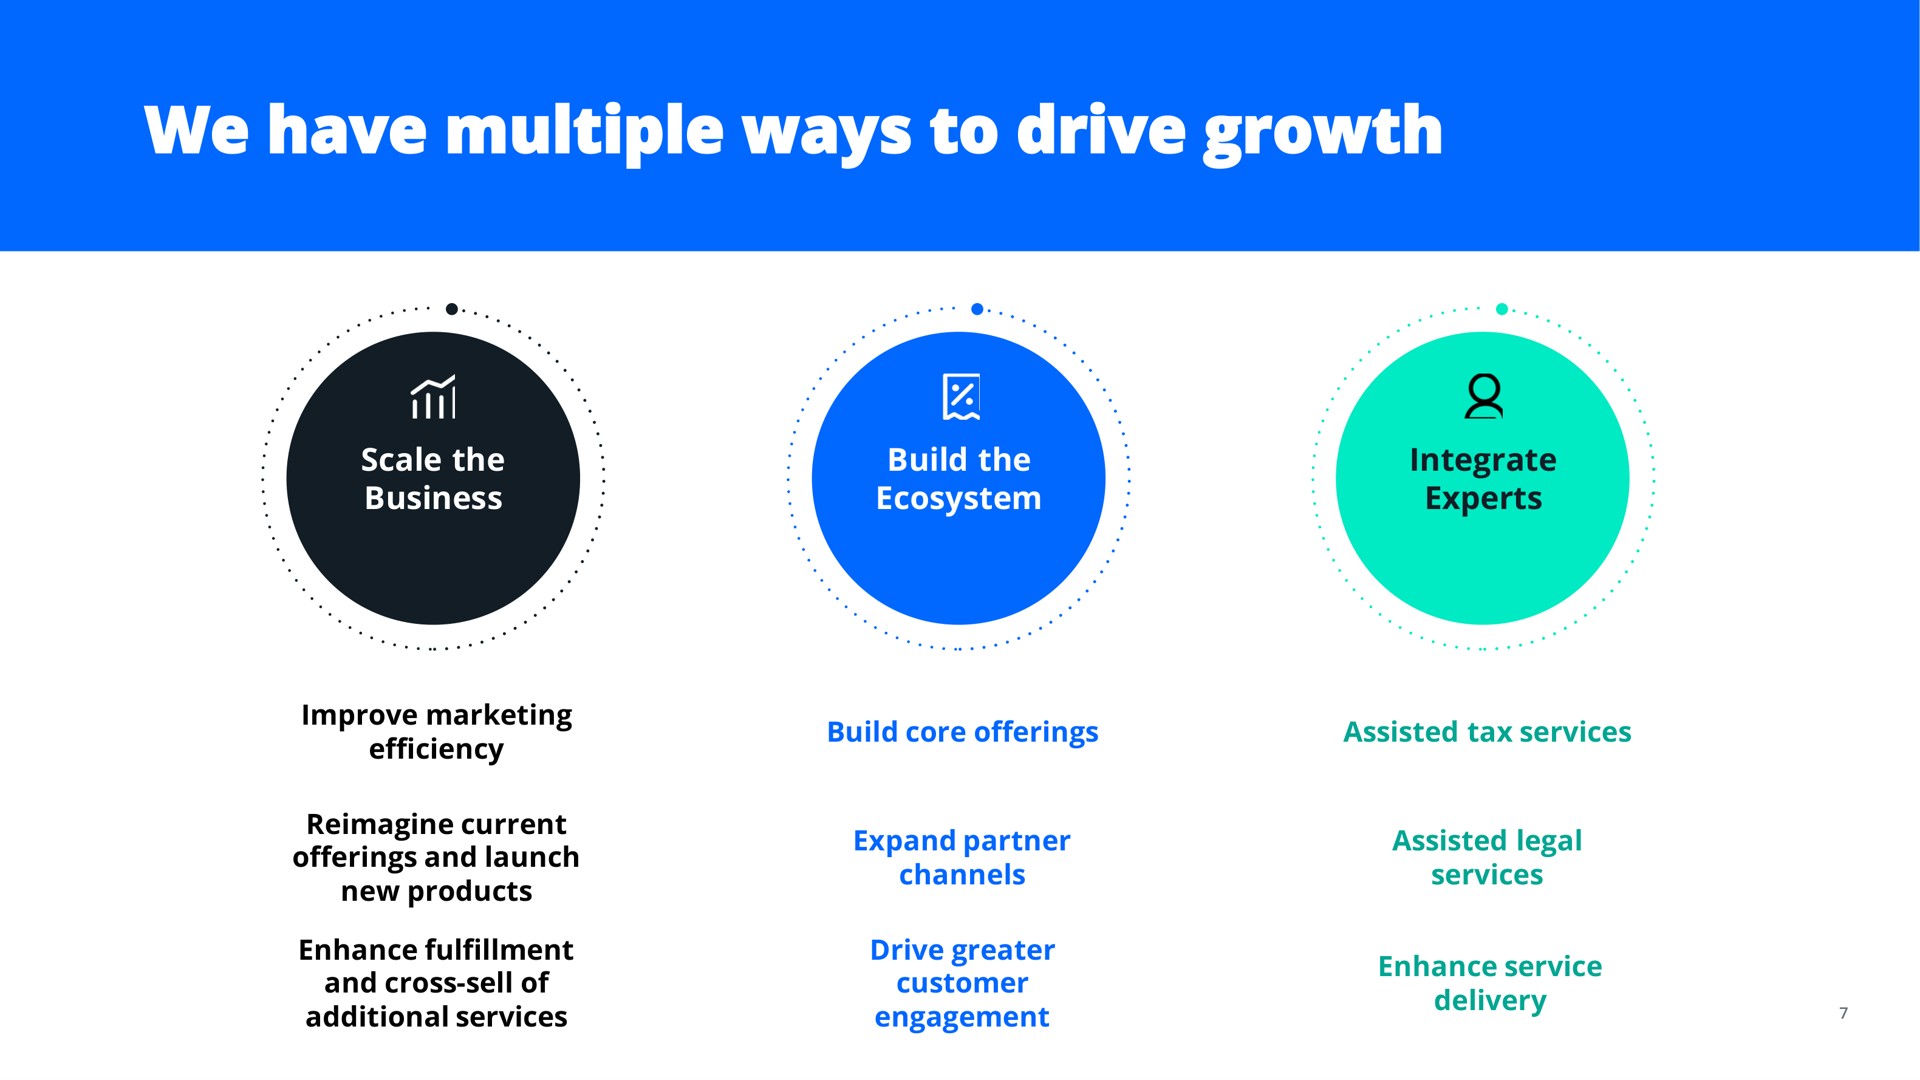 we have multiple ways to drive growth | LegalZoom.com